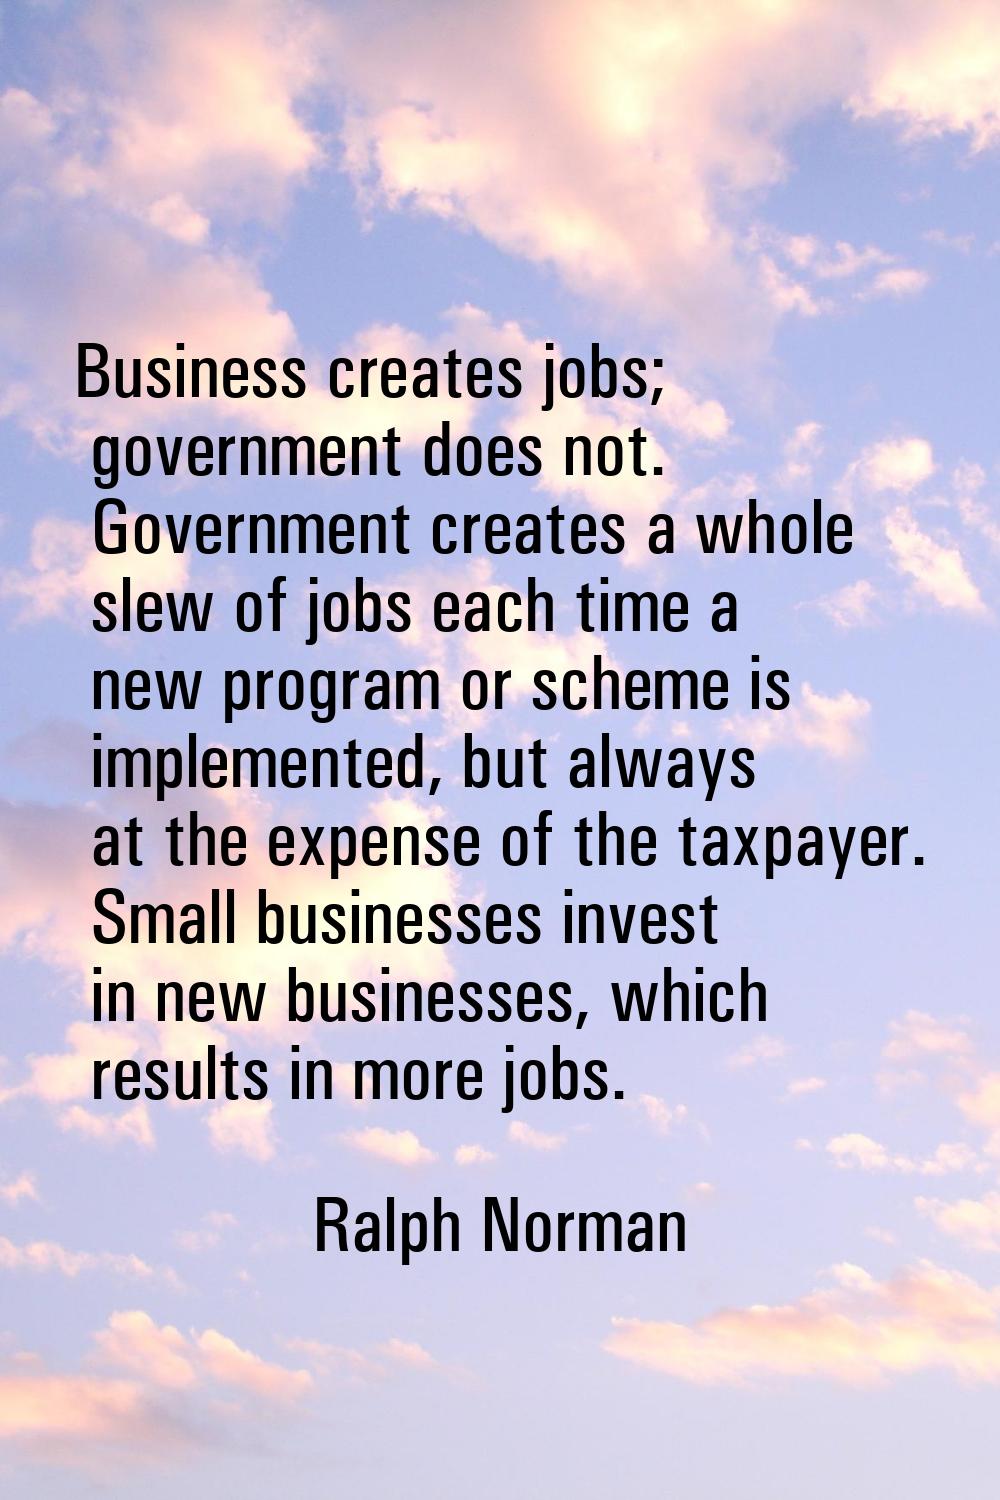 Business creates jobs; government does not. Government creates a whole slew of jobs each time a new